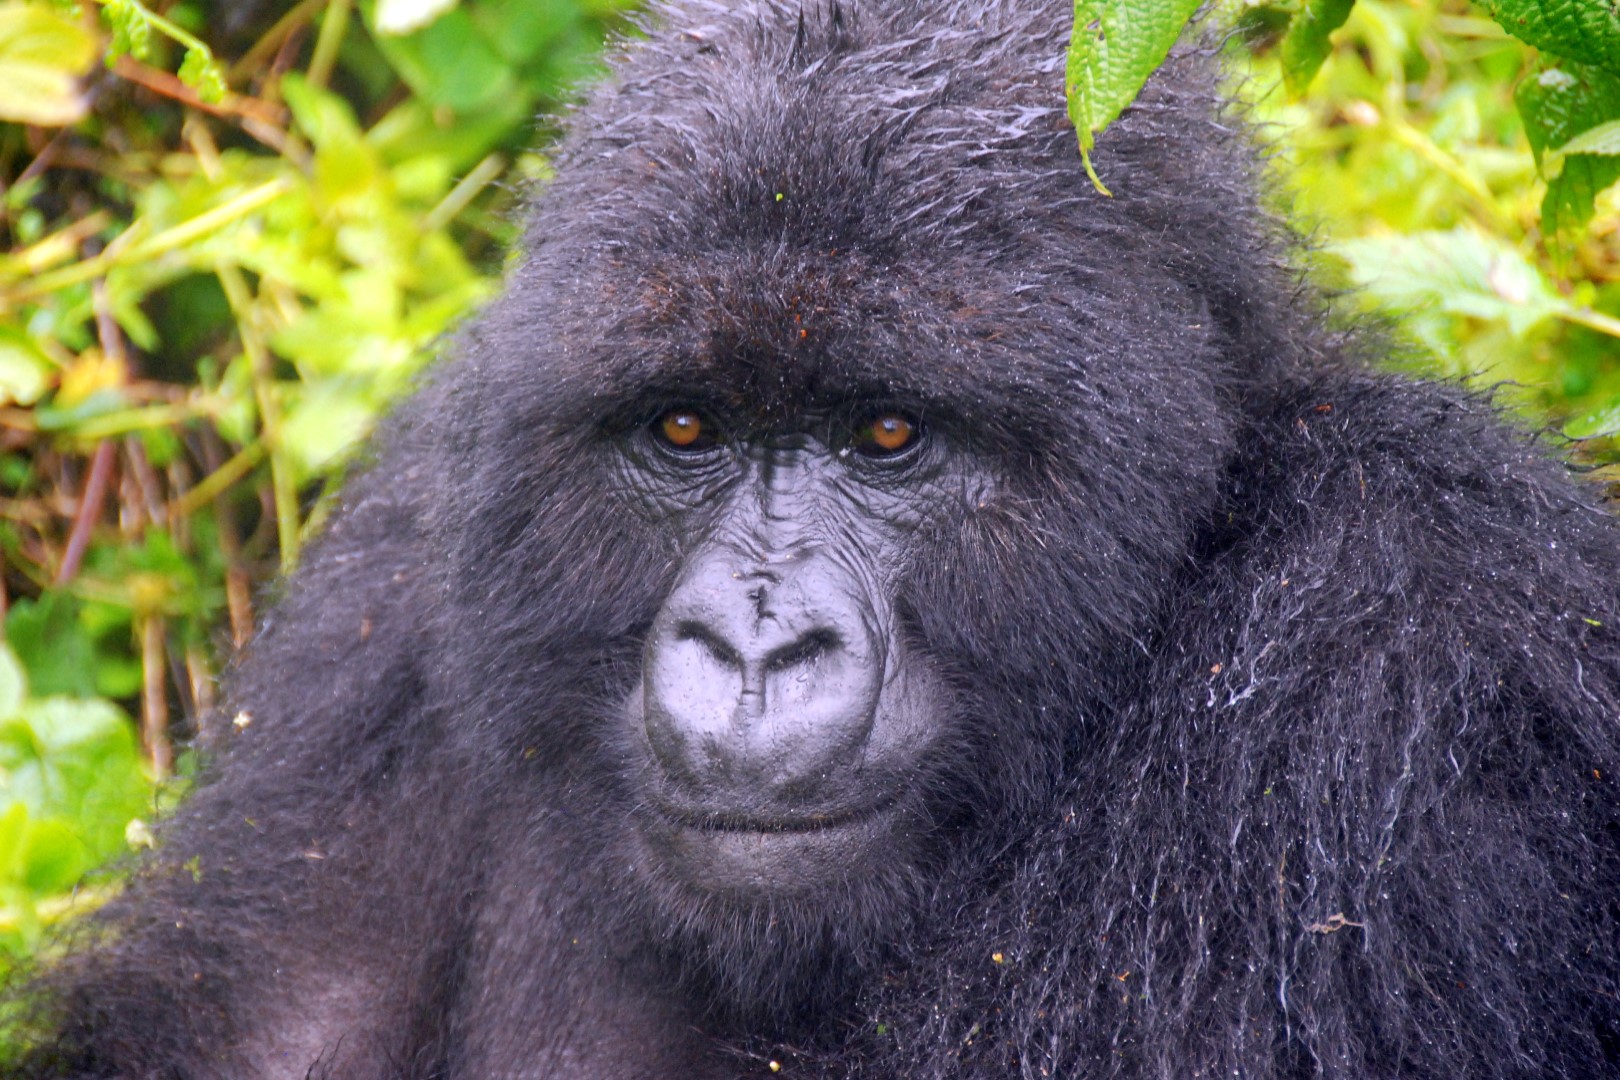 A closer look in the eyes of a female mountain gorilla in Bwindi Impenetrable National Park